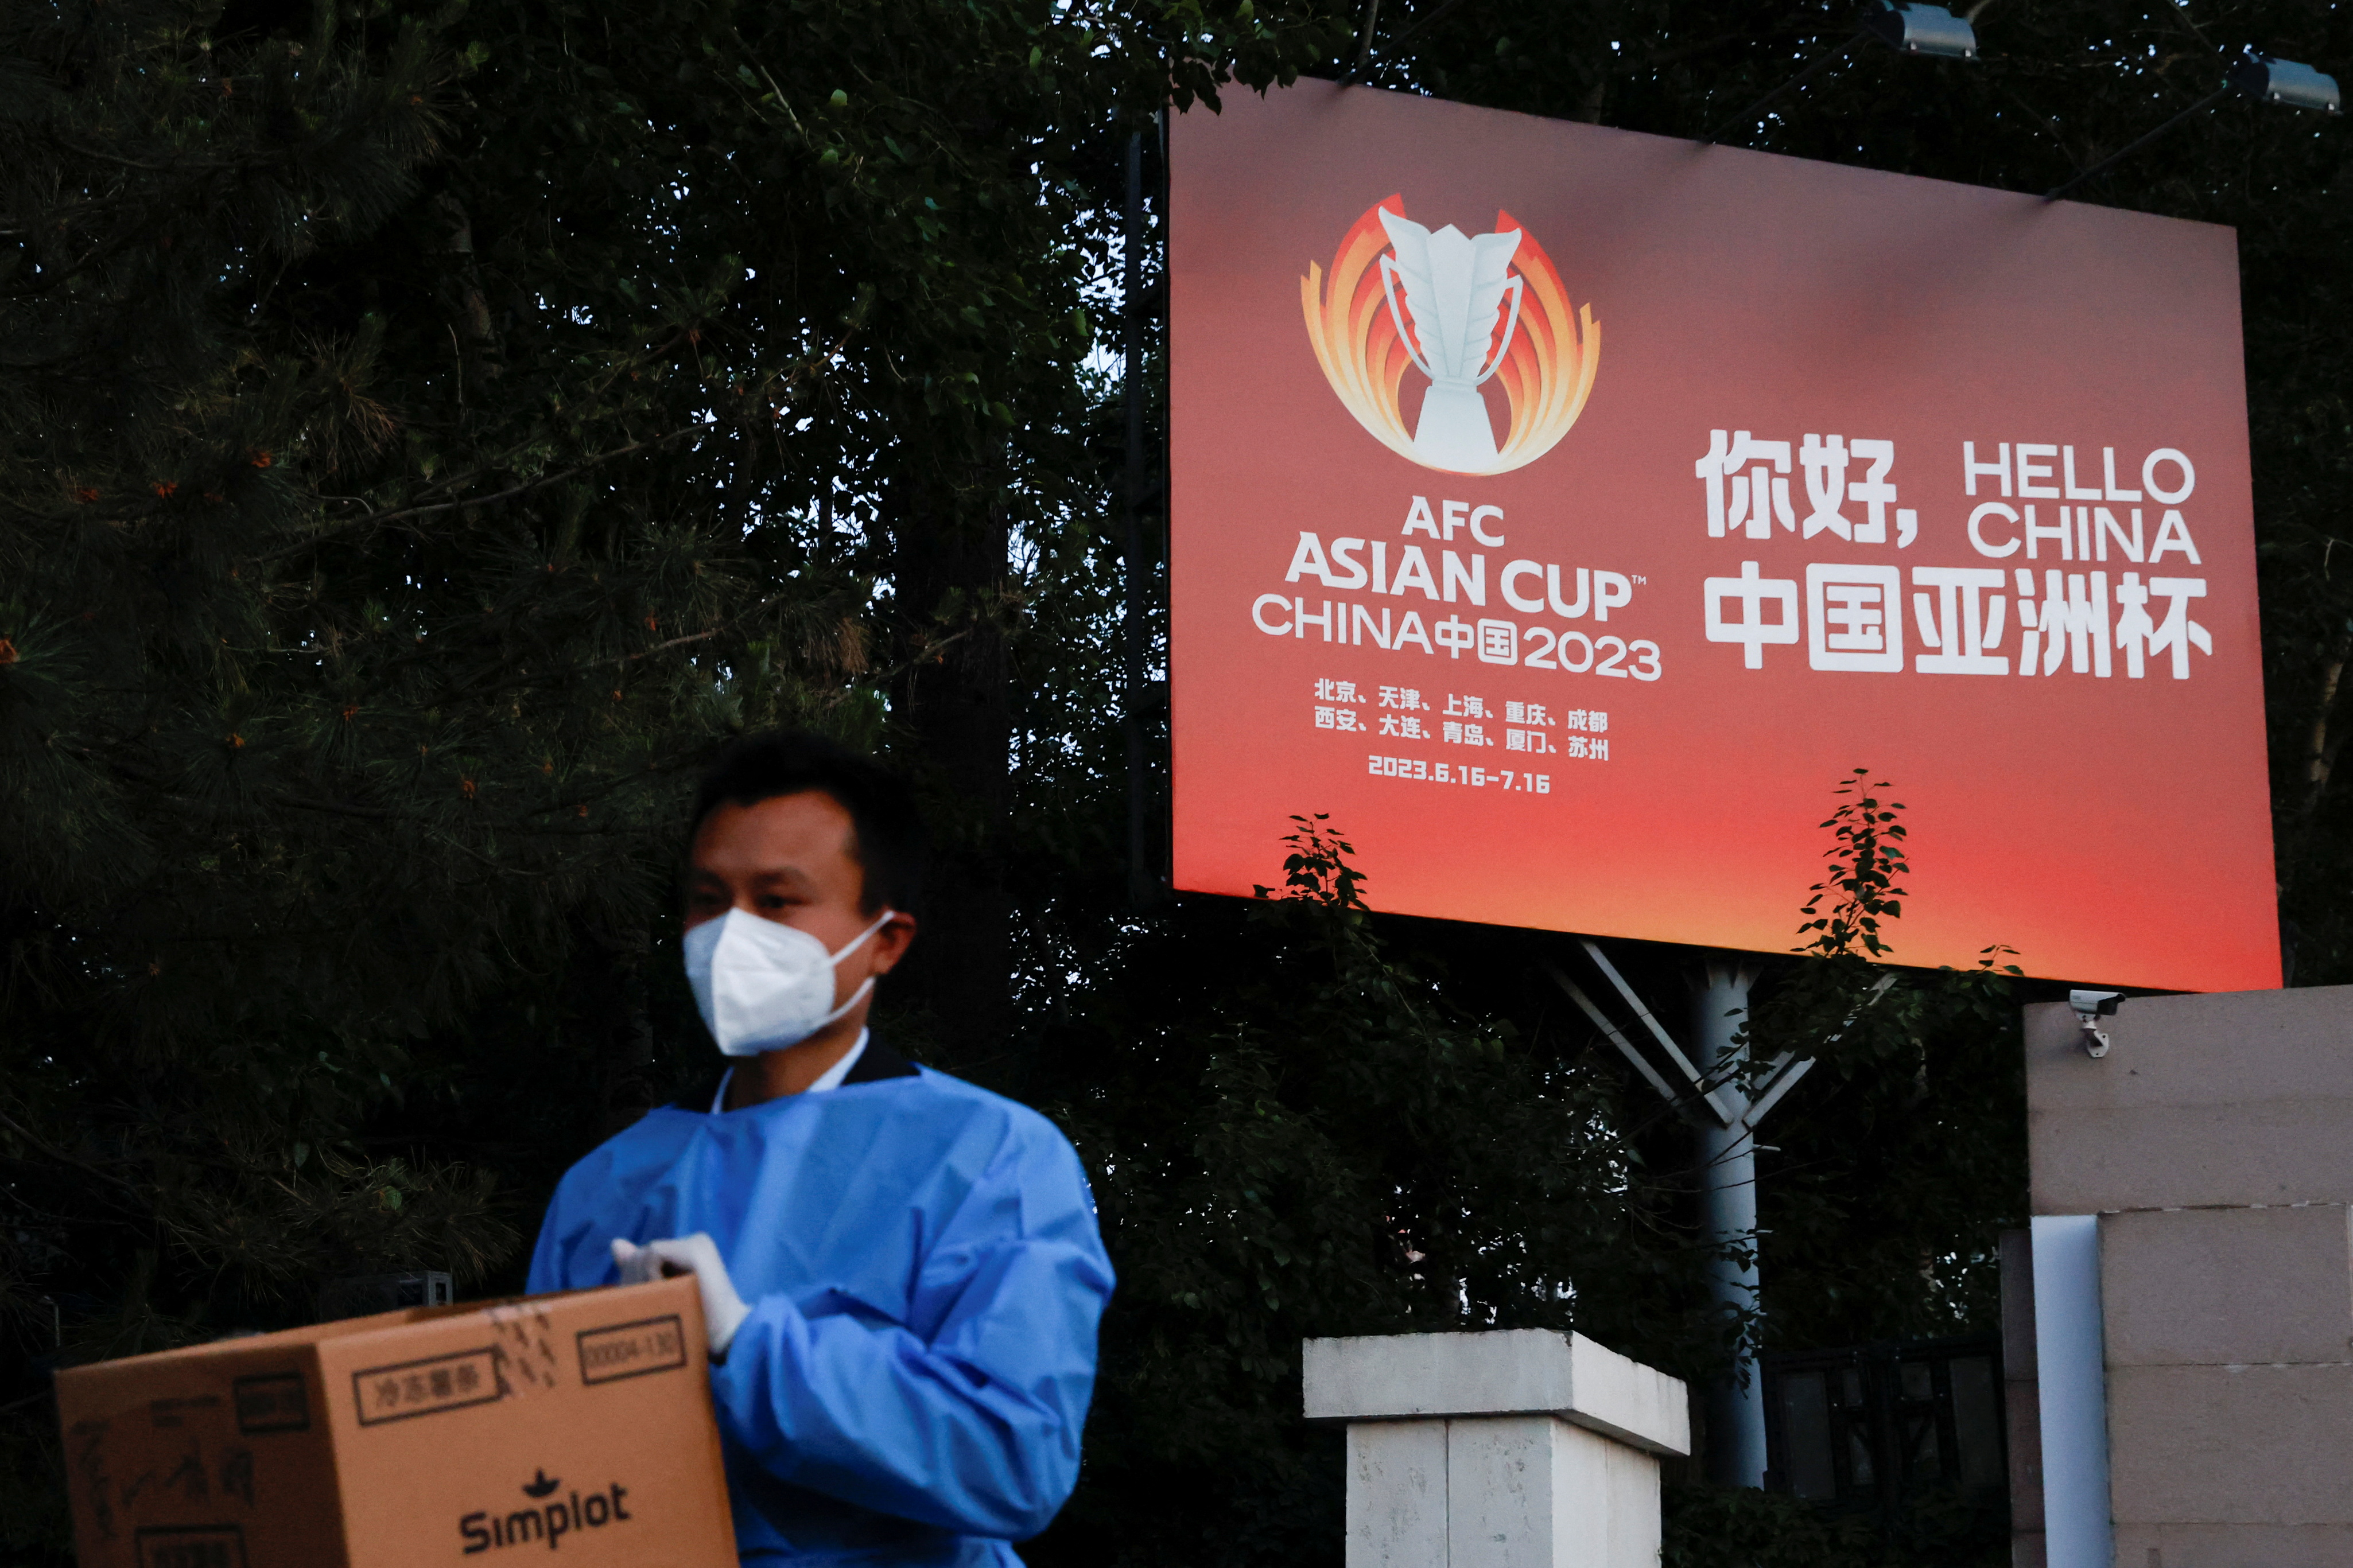 Man wearing PPE walks past a billboard of the AFC Asian Cup, amid the COVID-19 outbreak in Beijing